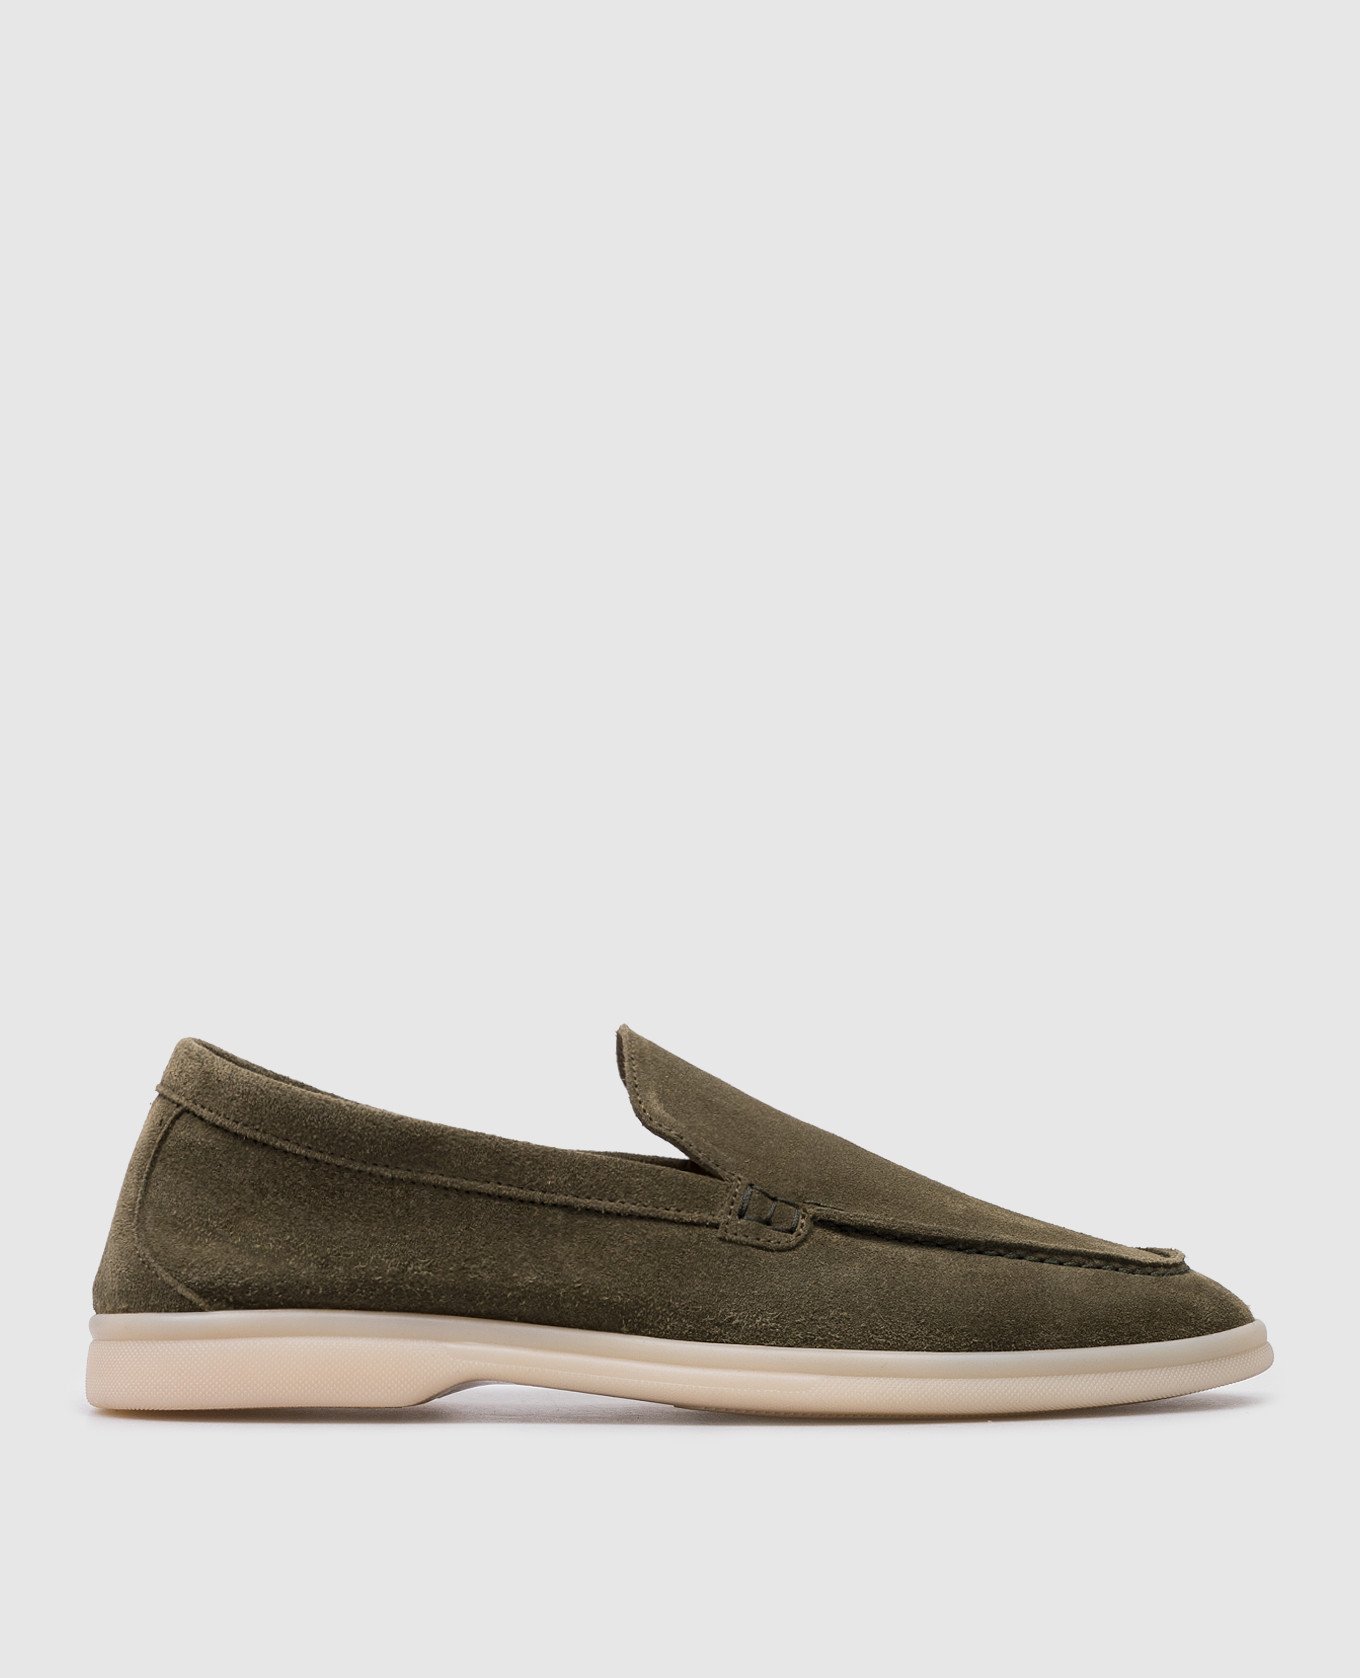 Khaki suede loafers